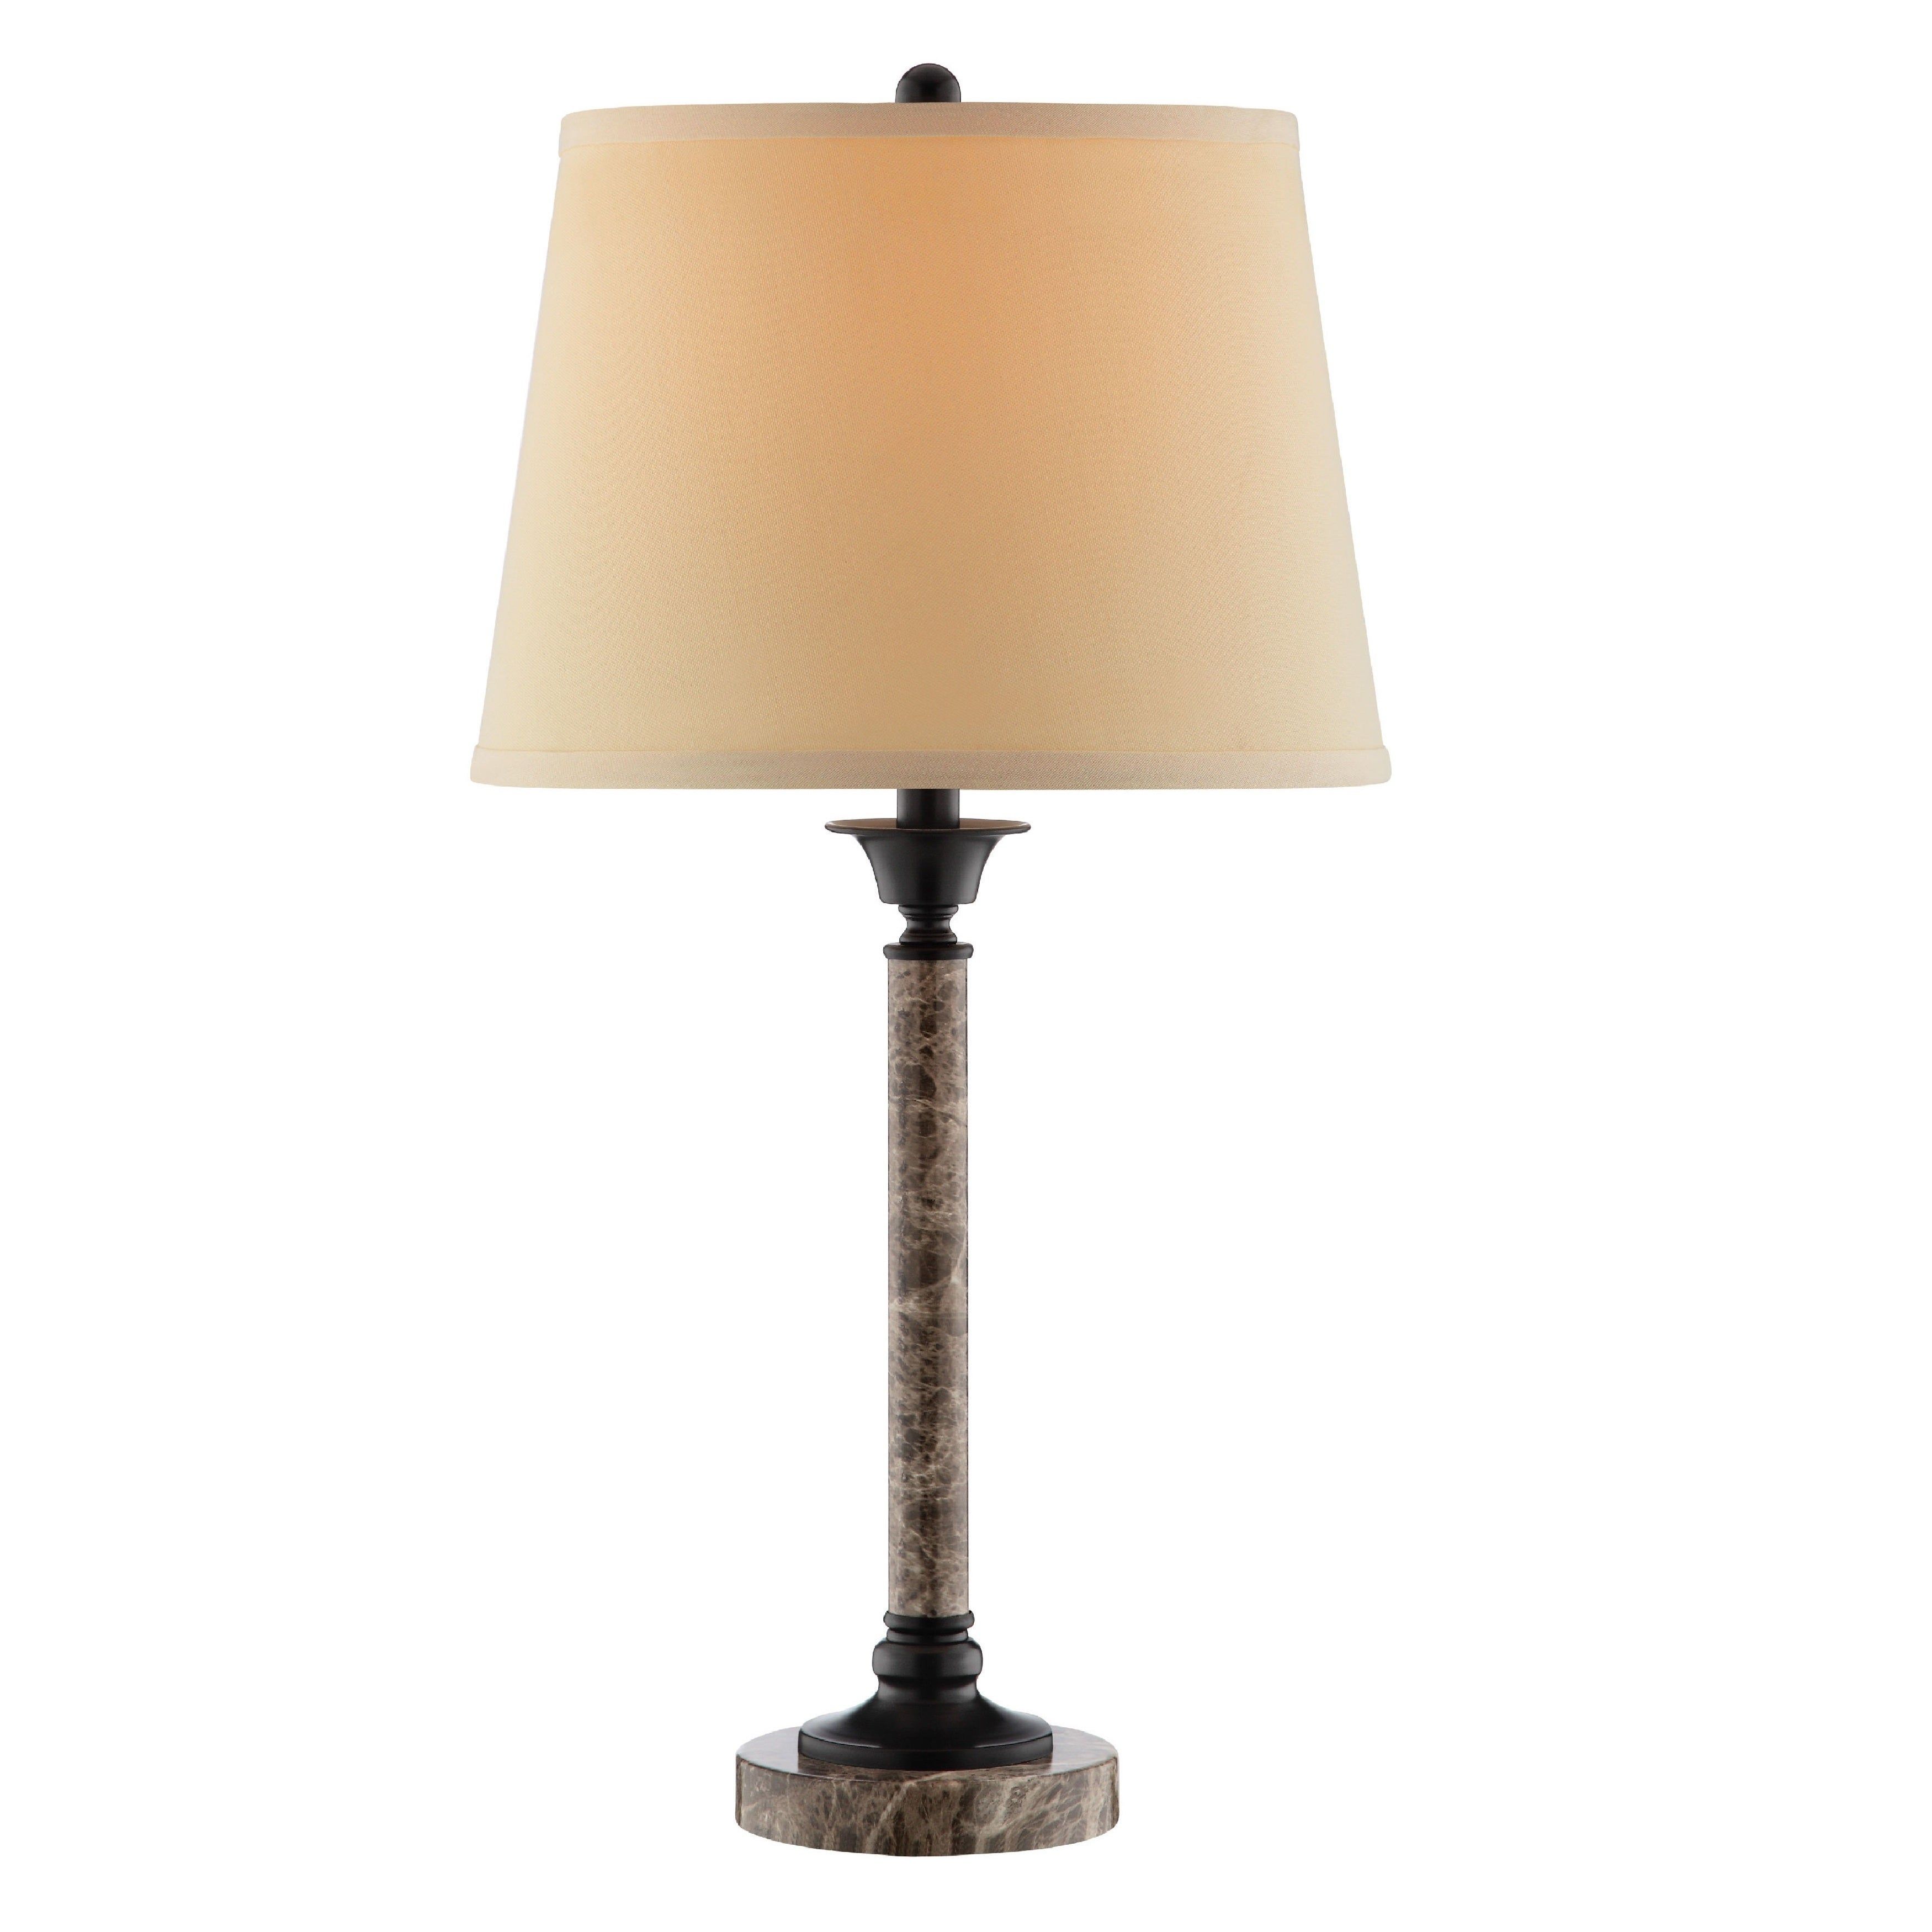 Malcom Table Lamp With Malcom Buffet Table (View 9 of 30)